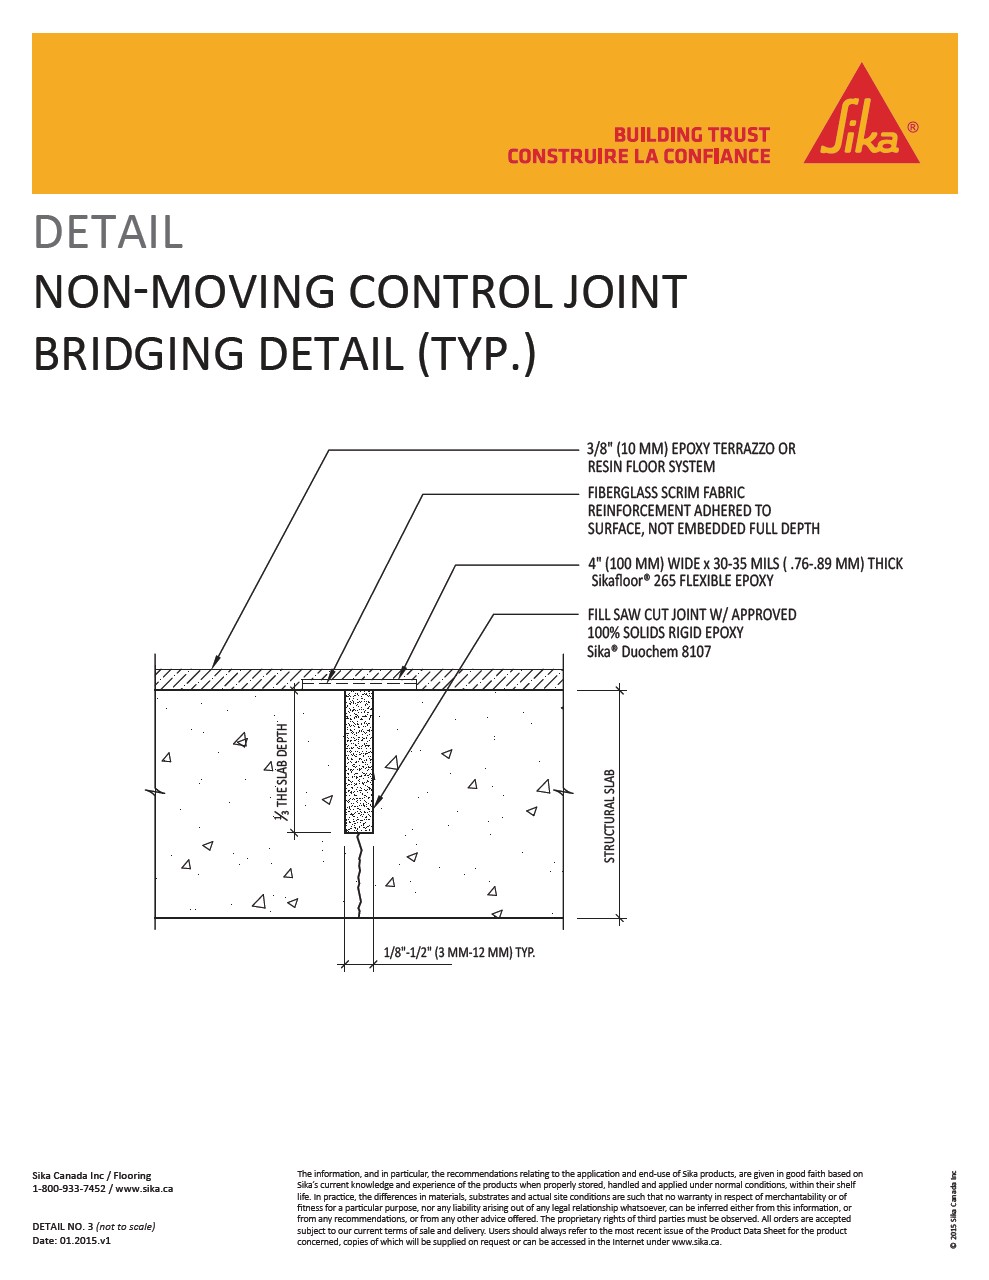 3-Non-Moving Contro Joint Bridging